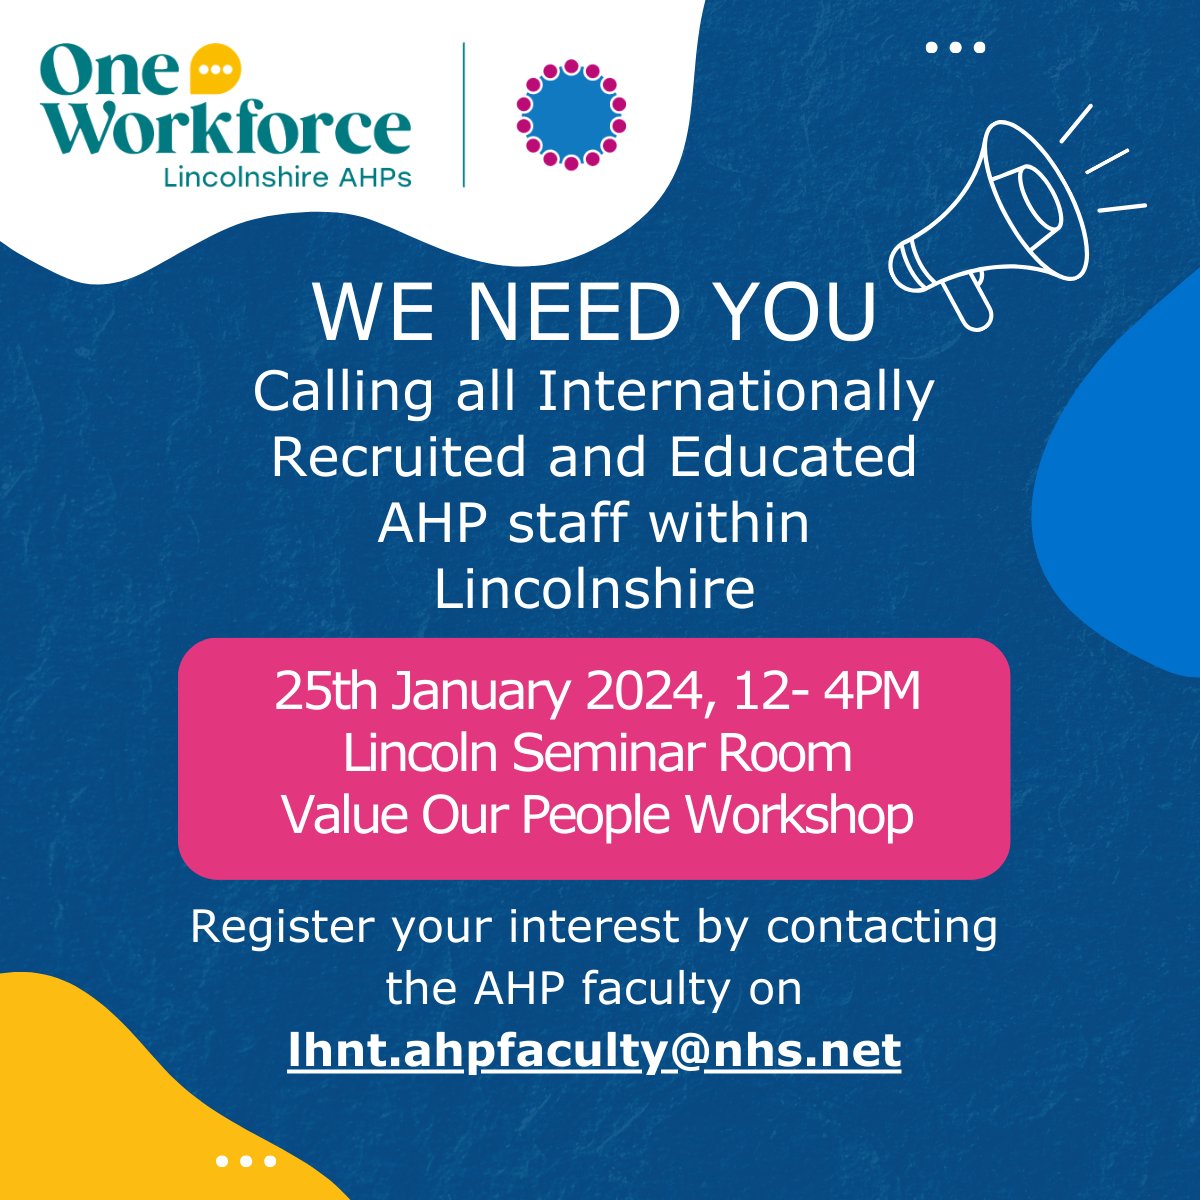 Calling all internationally Recruited and Educated AHP staff within Lincolnshire. If you are interested in joining the 'Value our People' Workshop on the 25th of January 2024 between 12-4pm, please email the AHP Faculty at lhnt.ahpfaculty@nhs.net for further details.